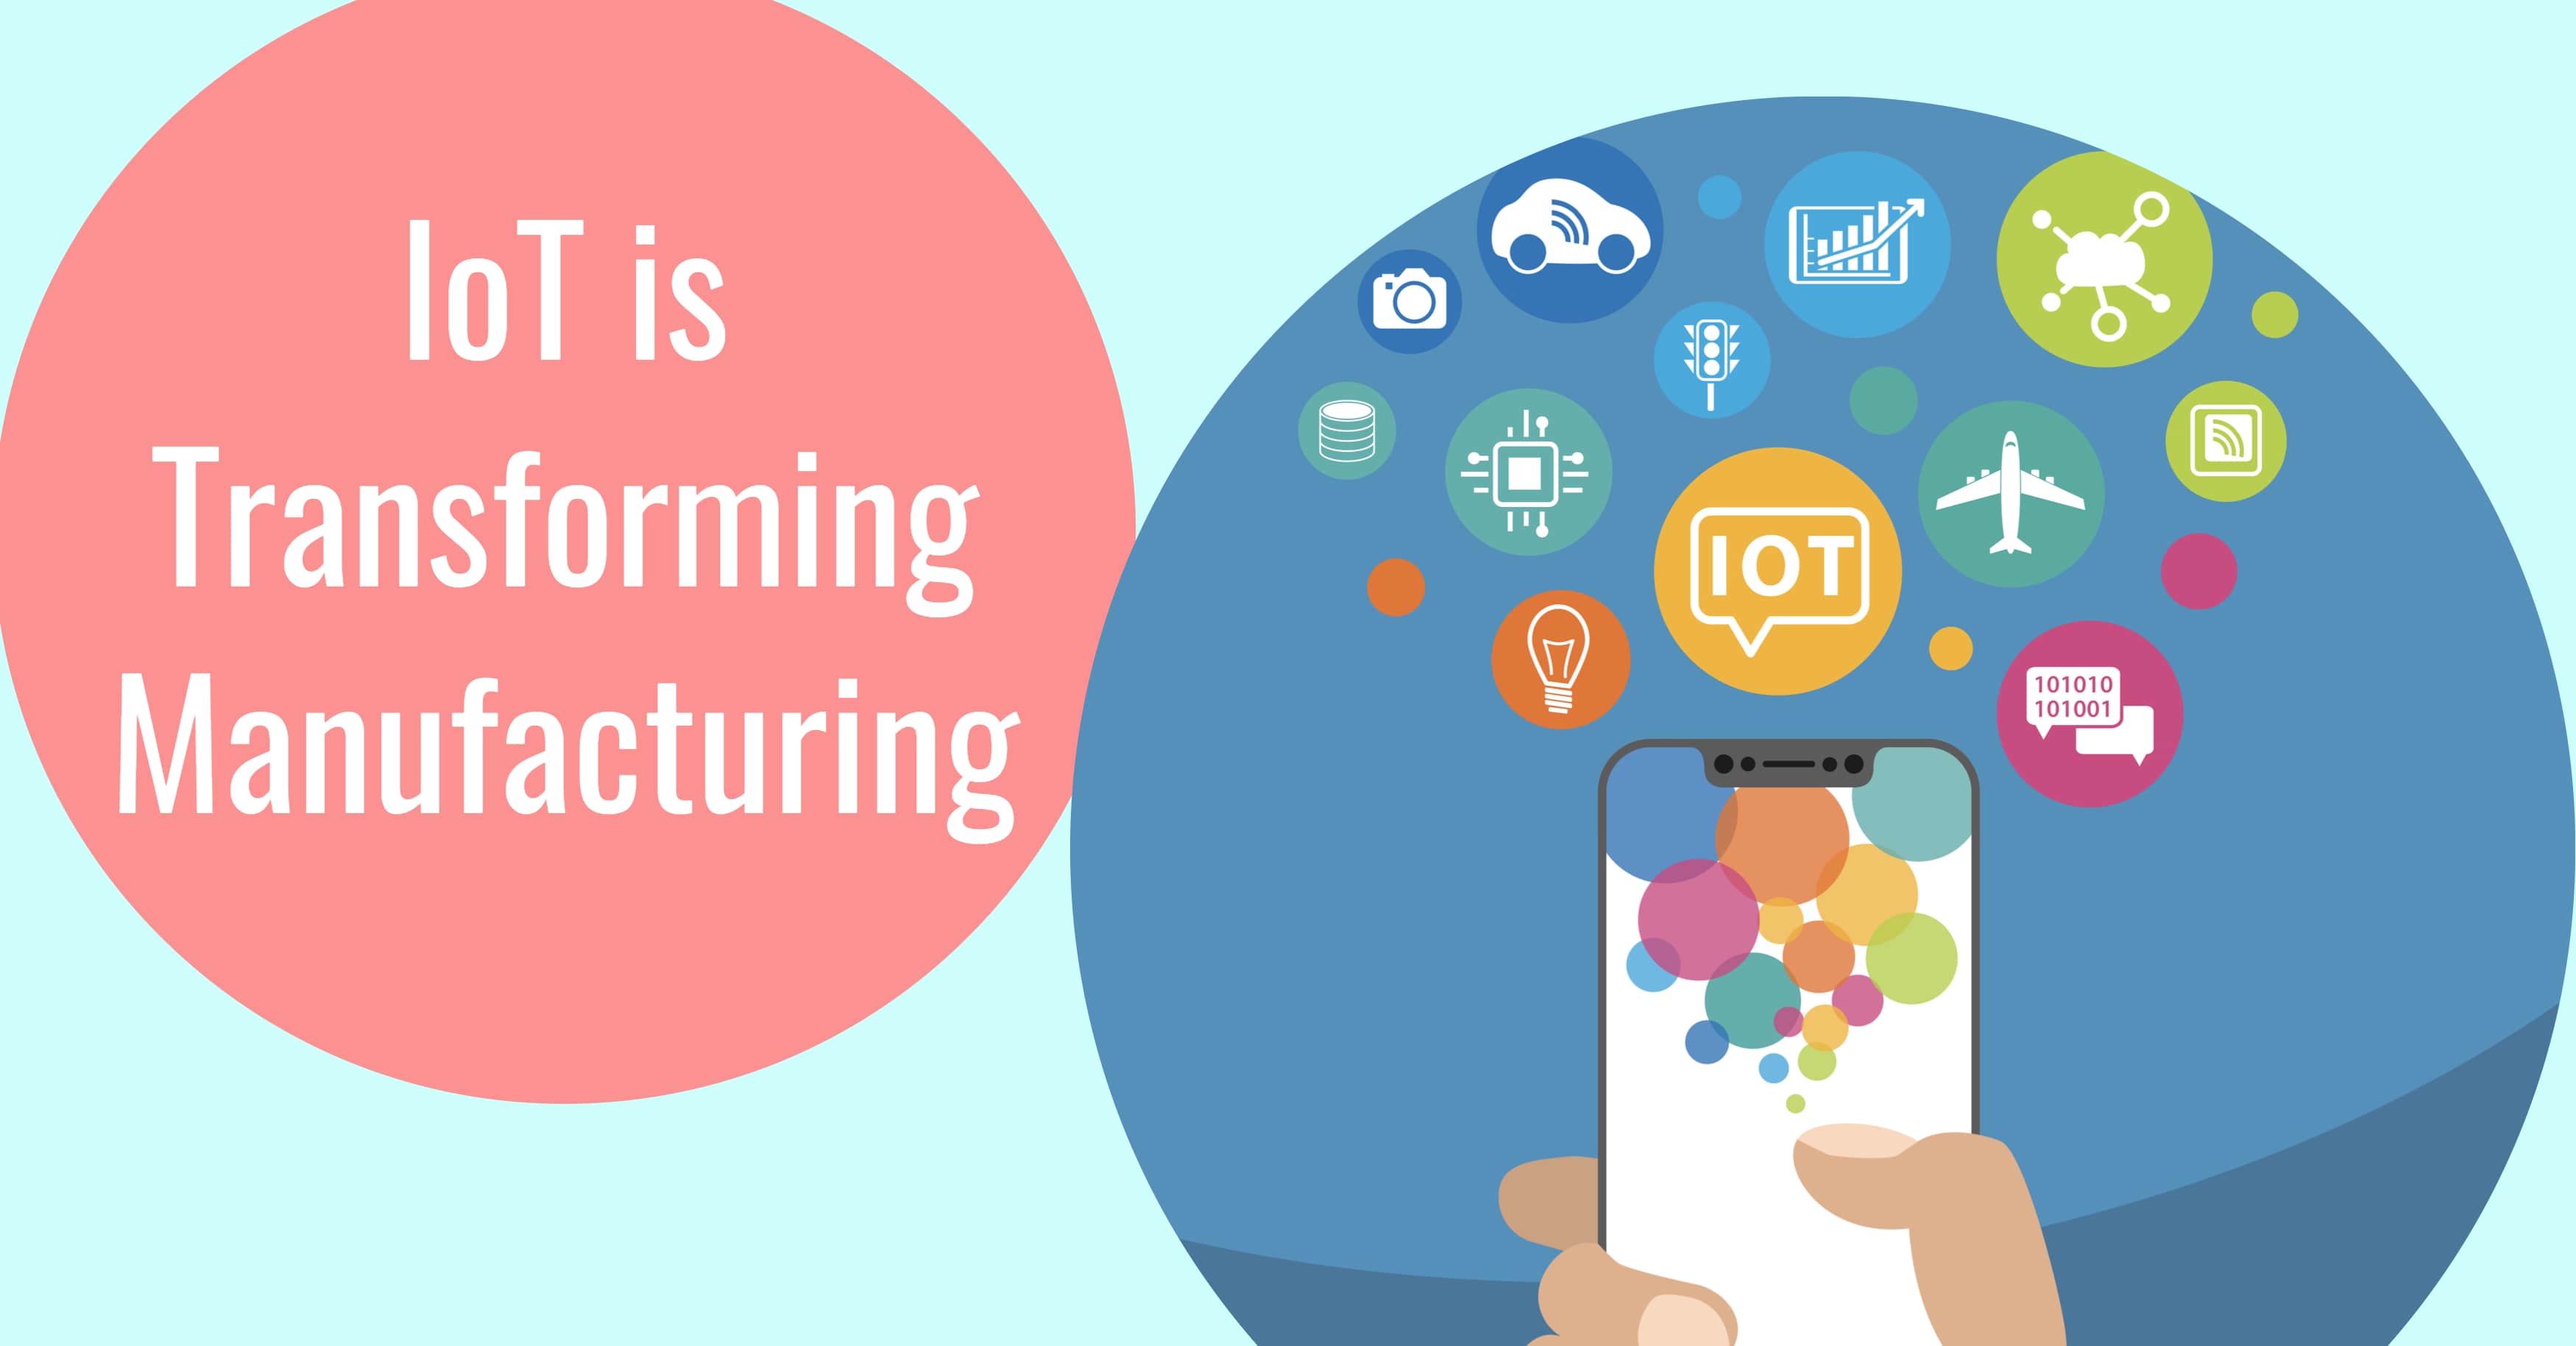 How is IoT Transforming Manufacturing?